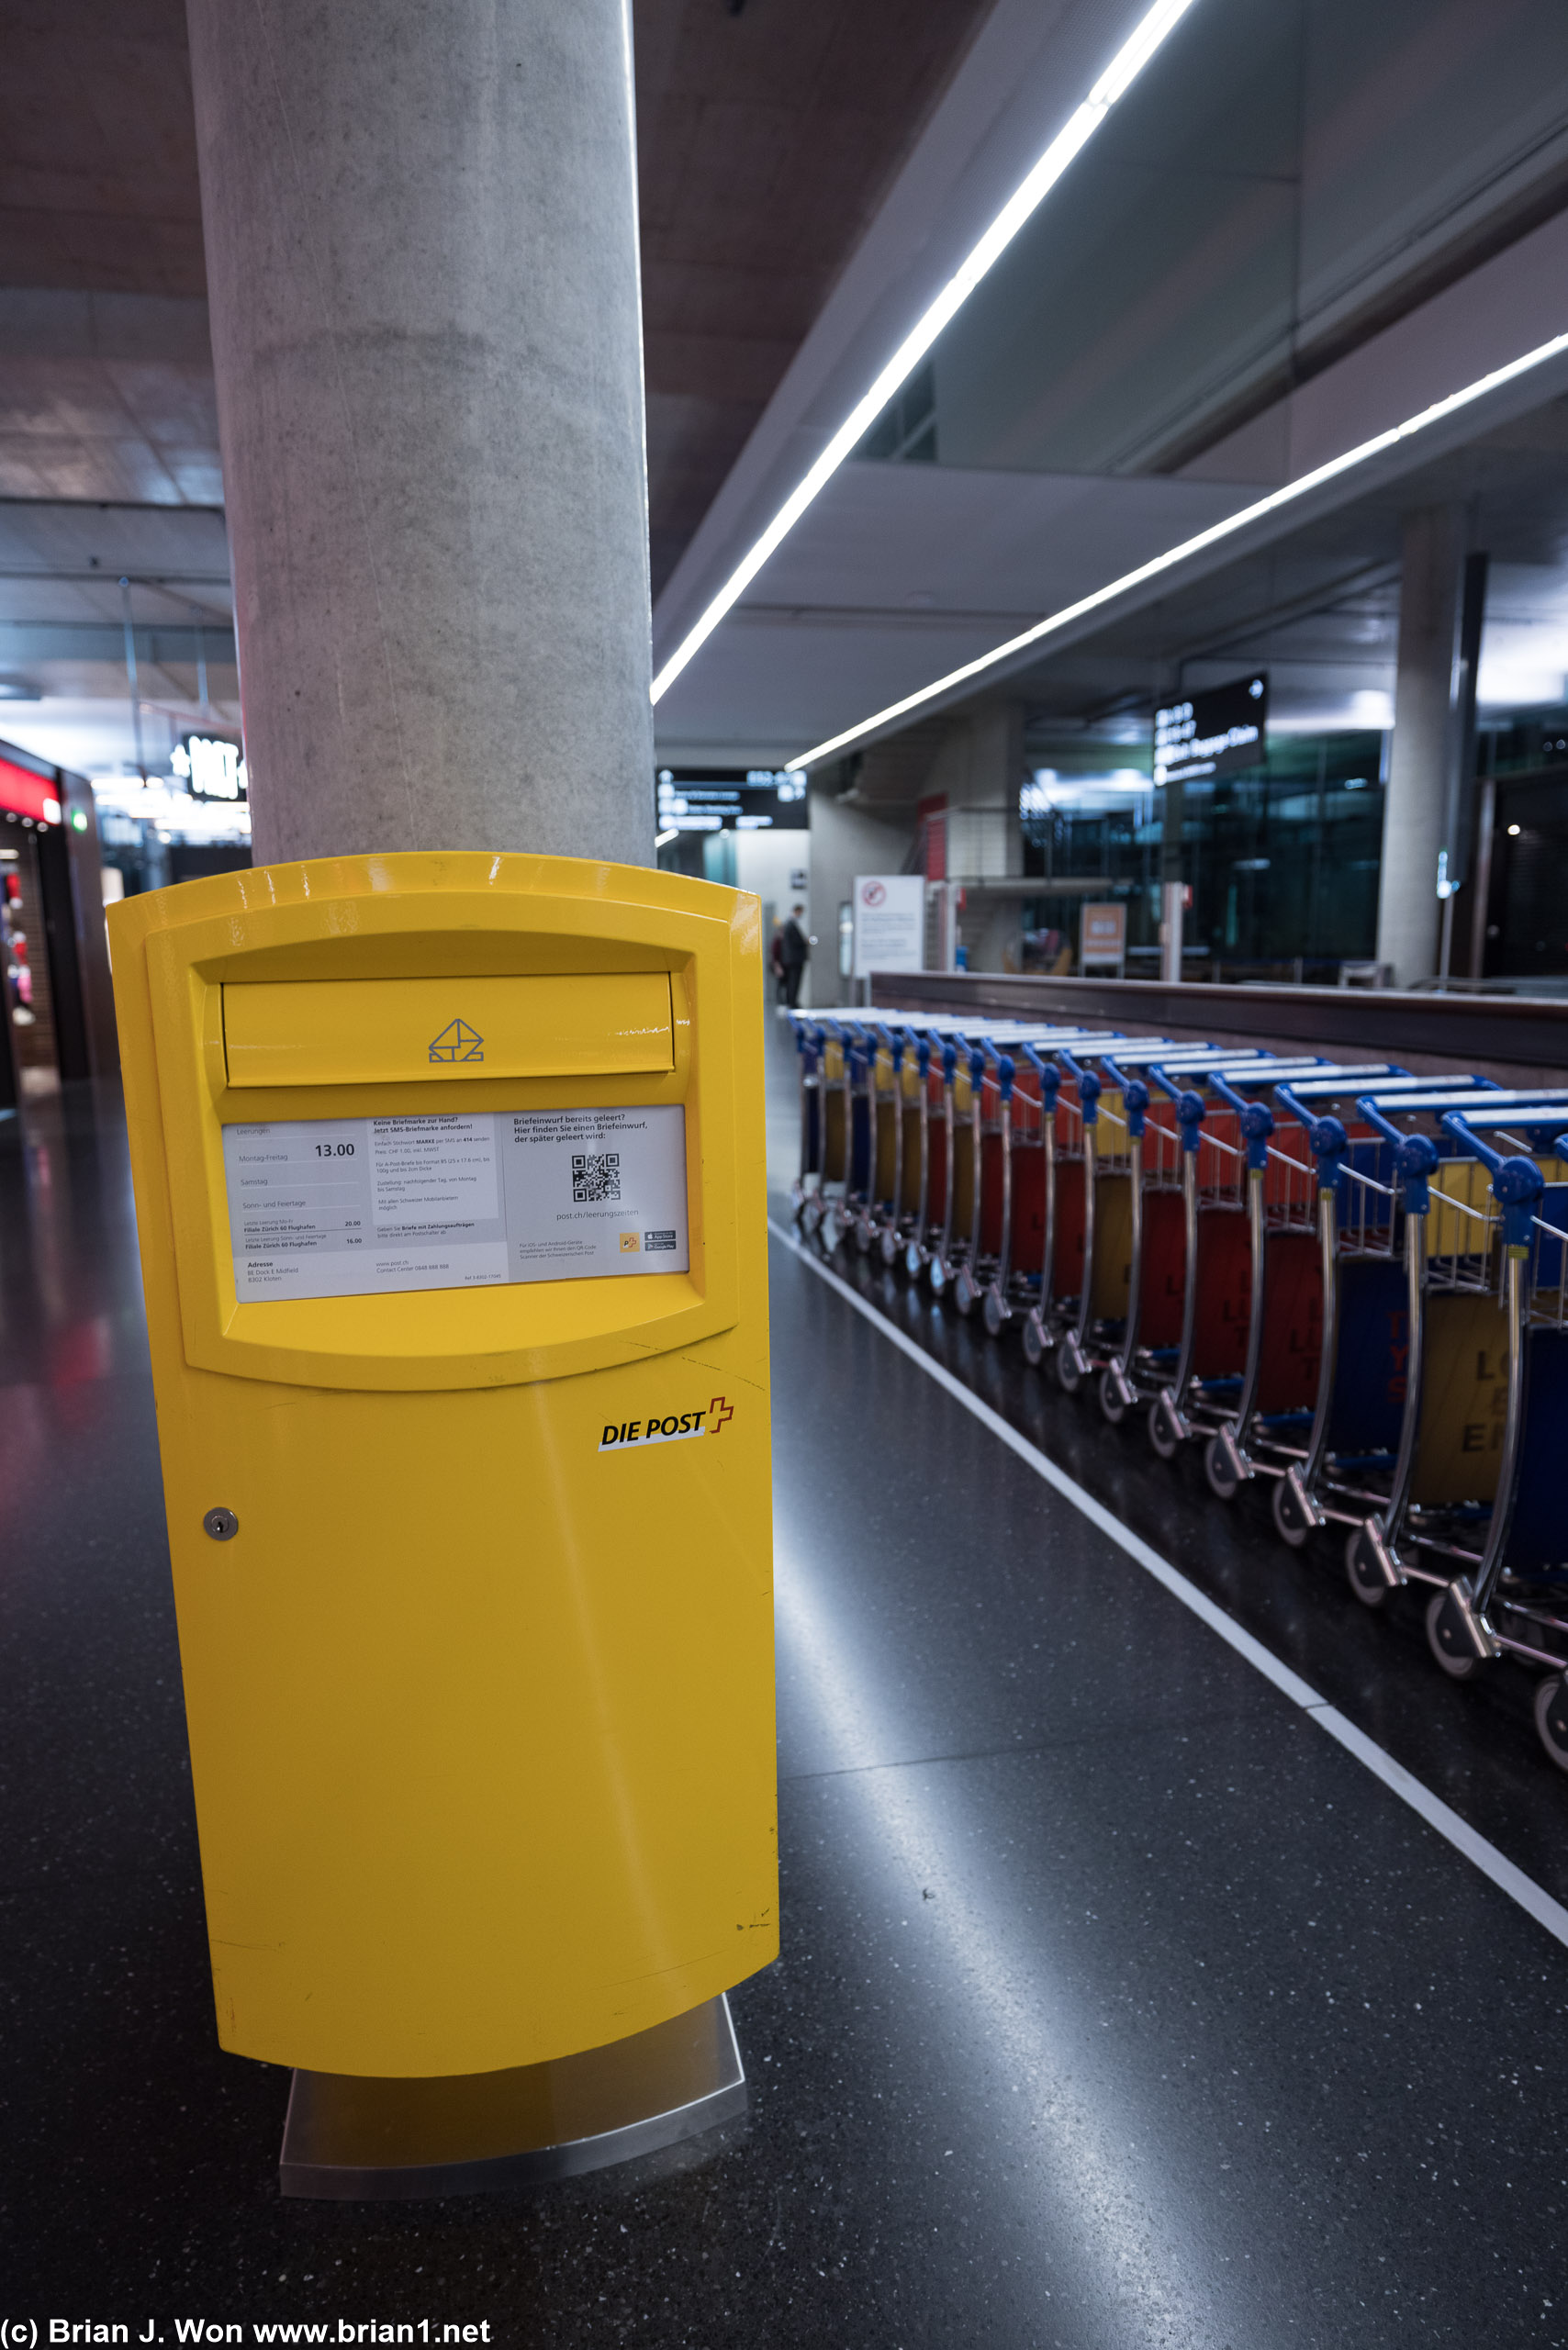 An airside mailbox. Rare sight these days.